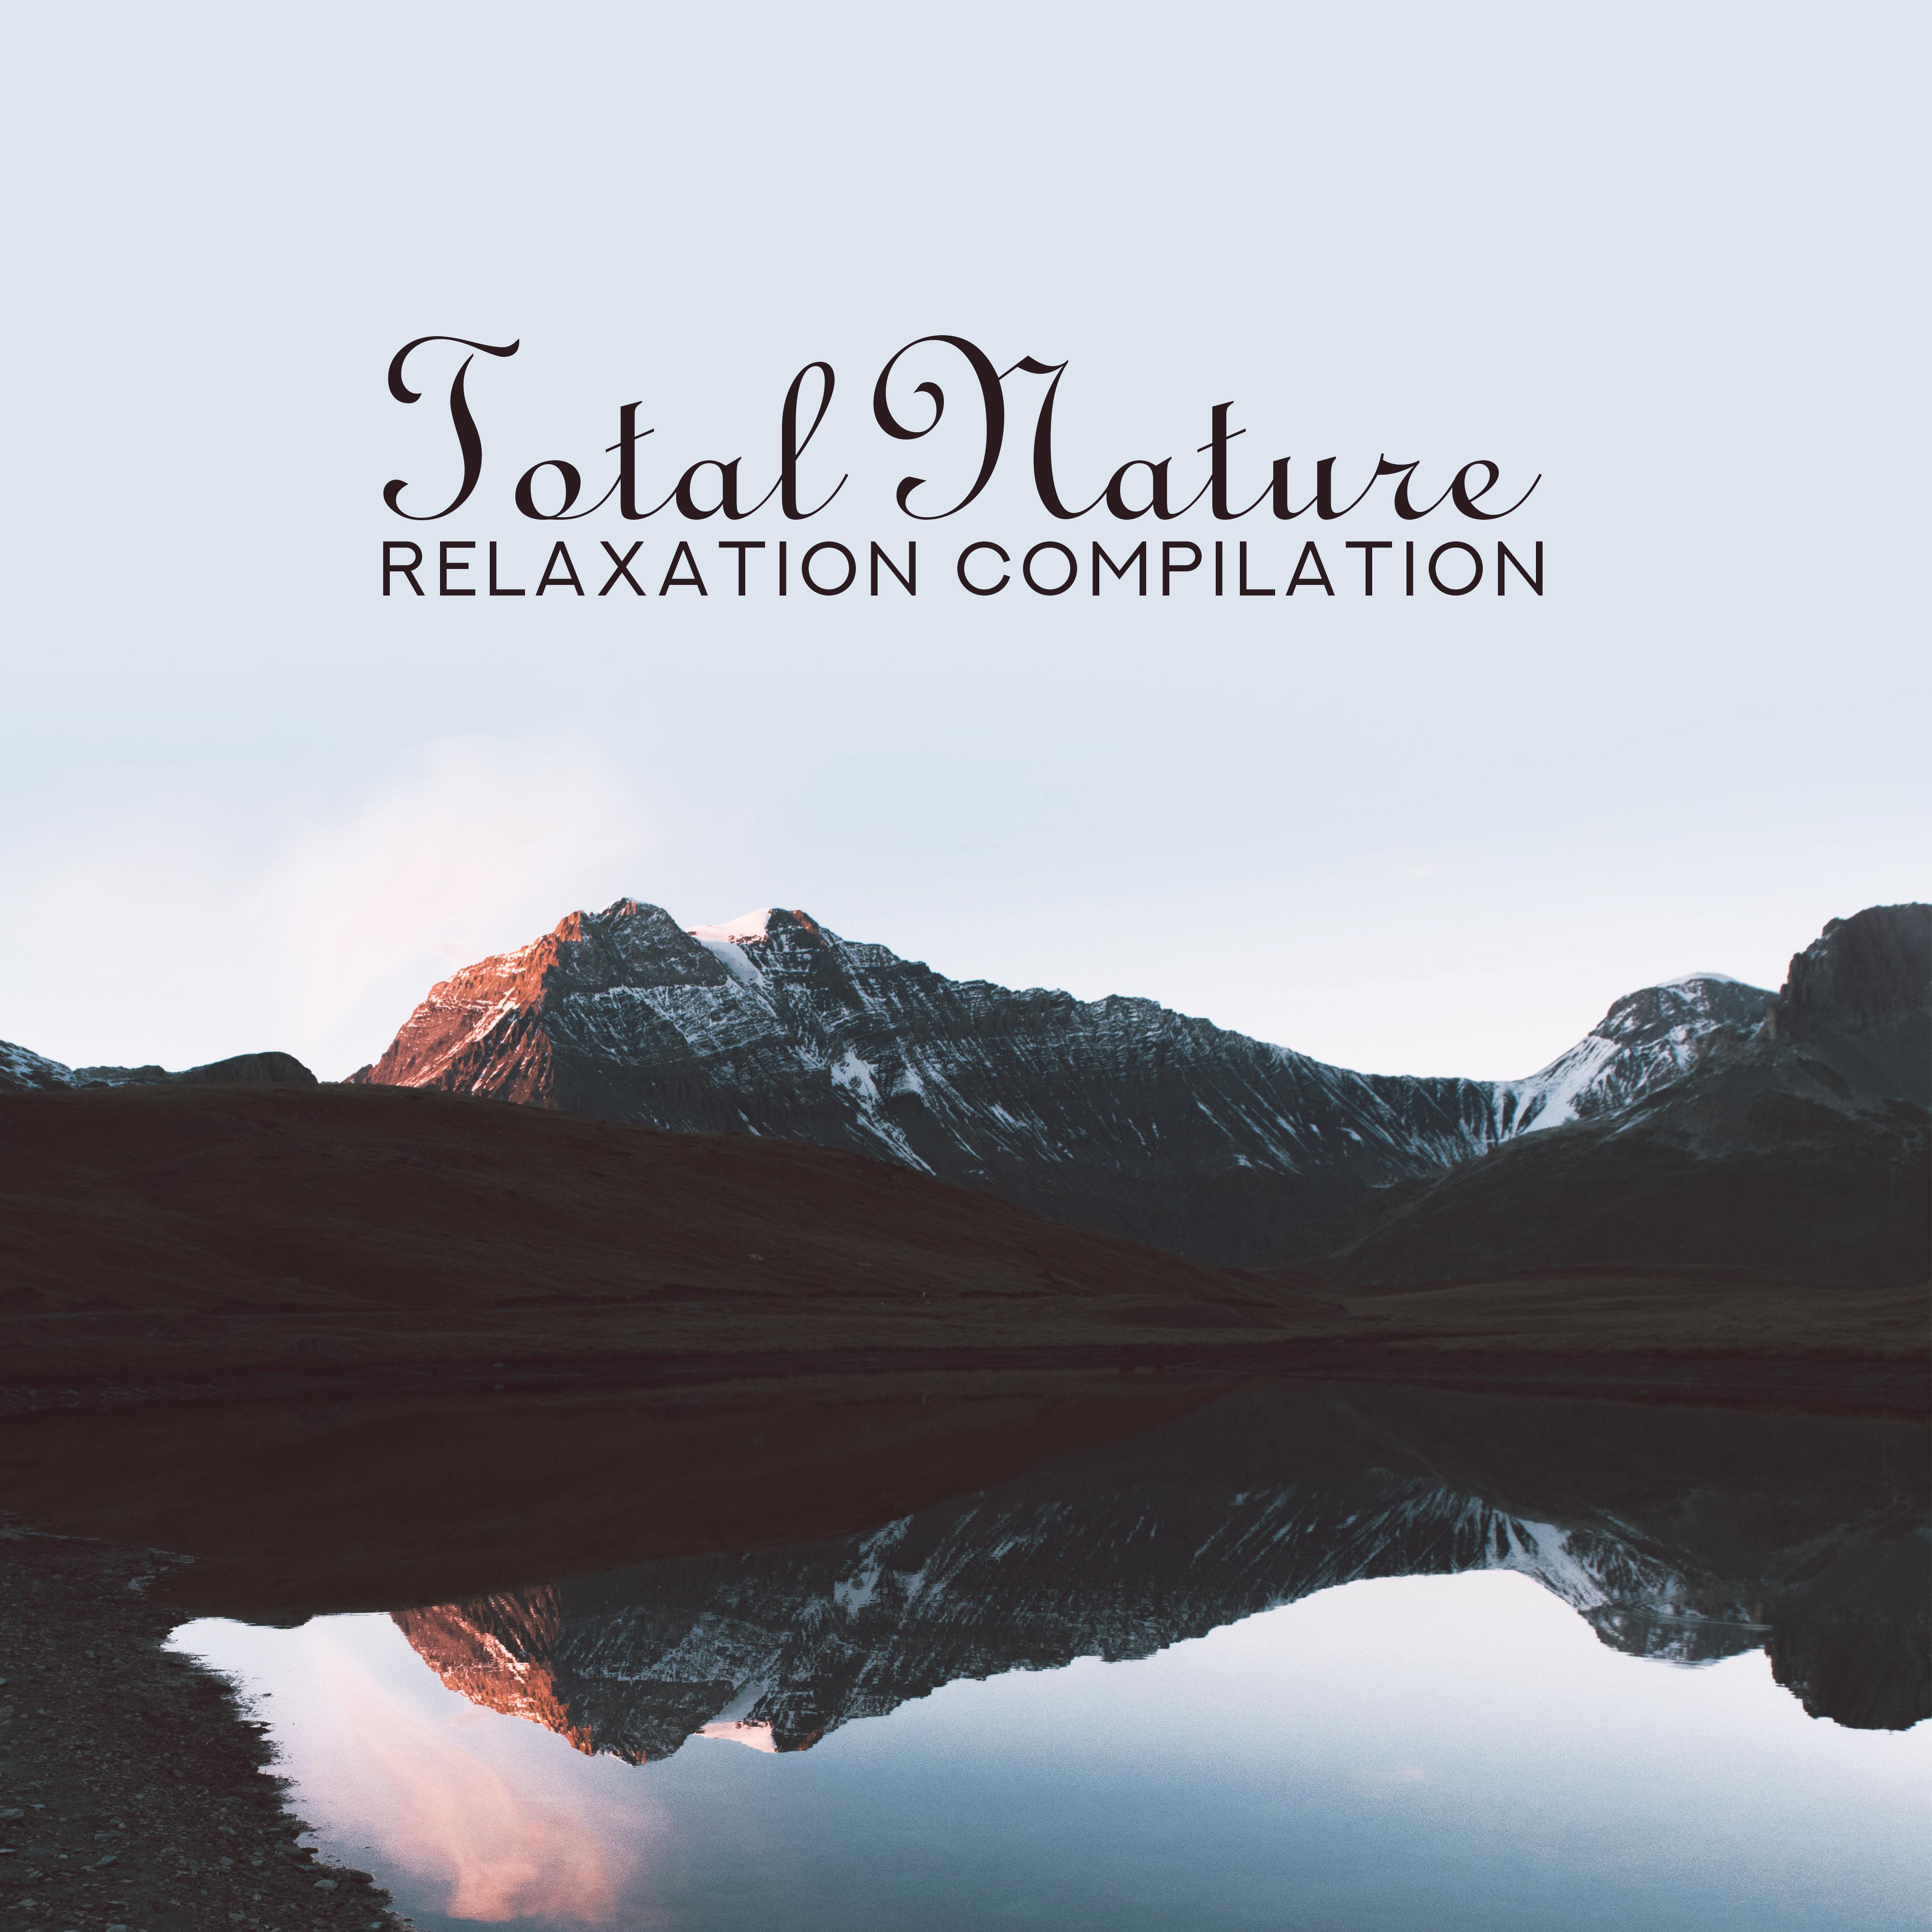 Total Nature Relaxation Compilation: Selection of 15 Best 2019 New Age Music with Nature Sounds of Water, Wind, Birds & Others, Full Calm Down, Stress Relief, Soothing Songs